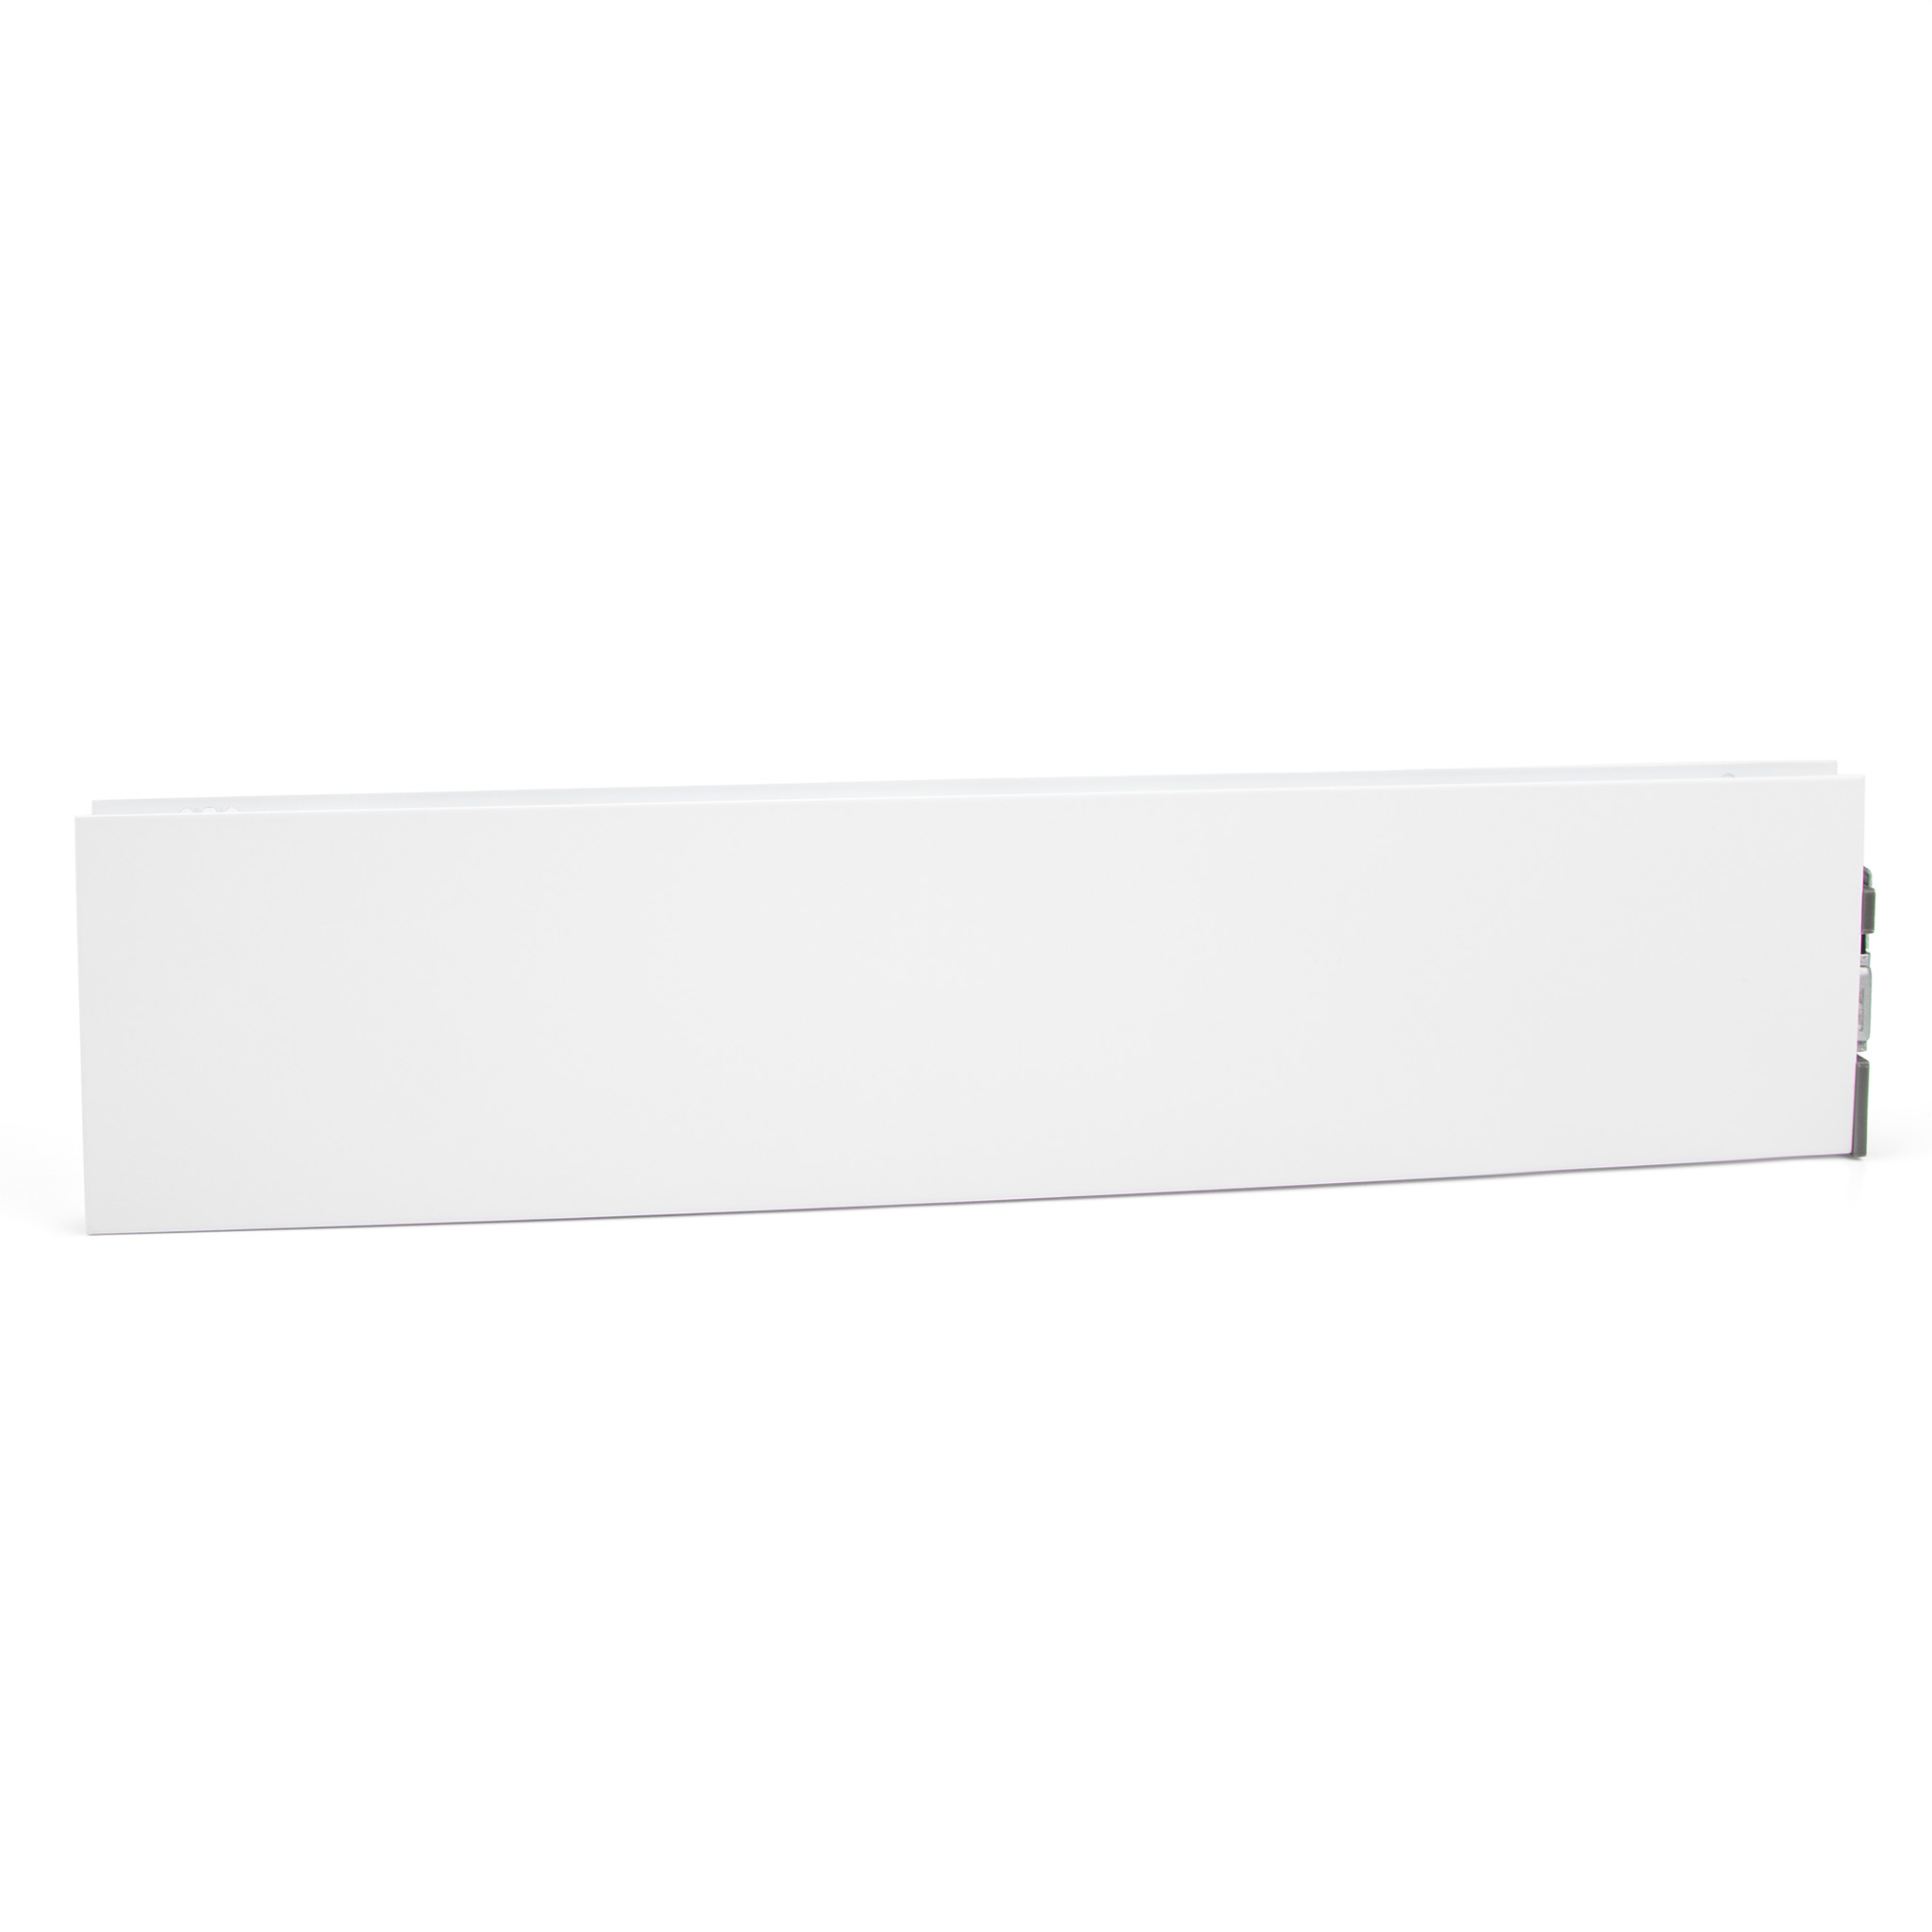 M-Series Fusion Side Wall, 300mm Length, 88mm Height, Lunar White